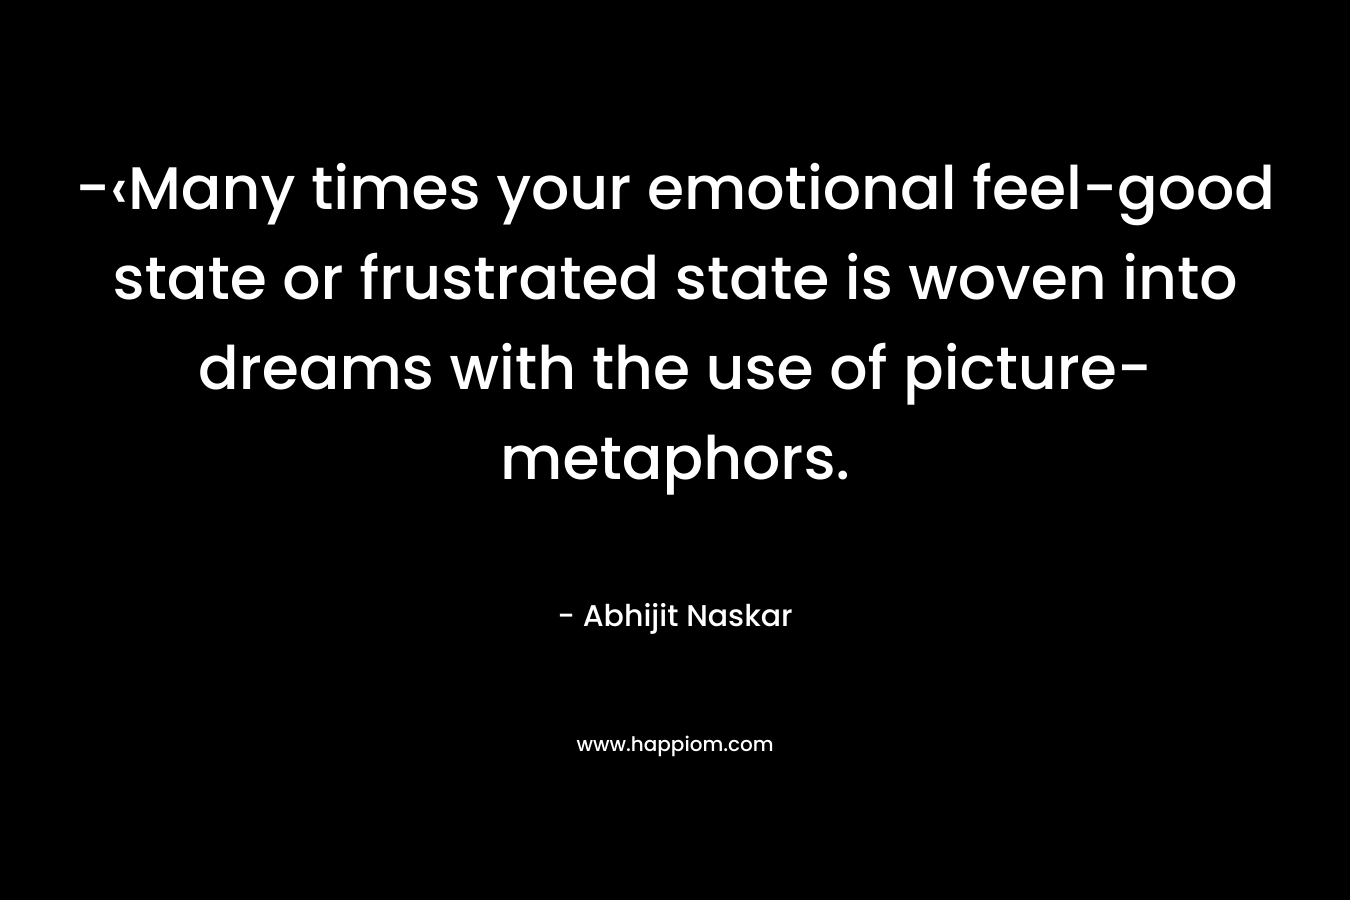 -‹Many times your emotional feel-good state or frustrated state is woven into dreams with the use of picture-metaphors. – Abhijit Naskar